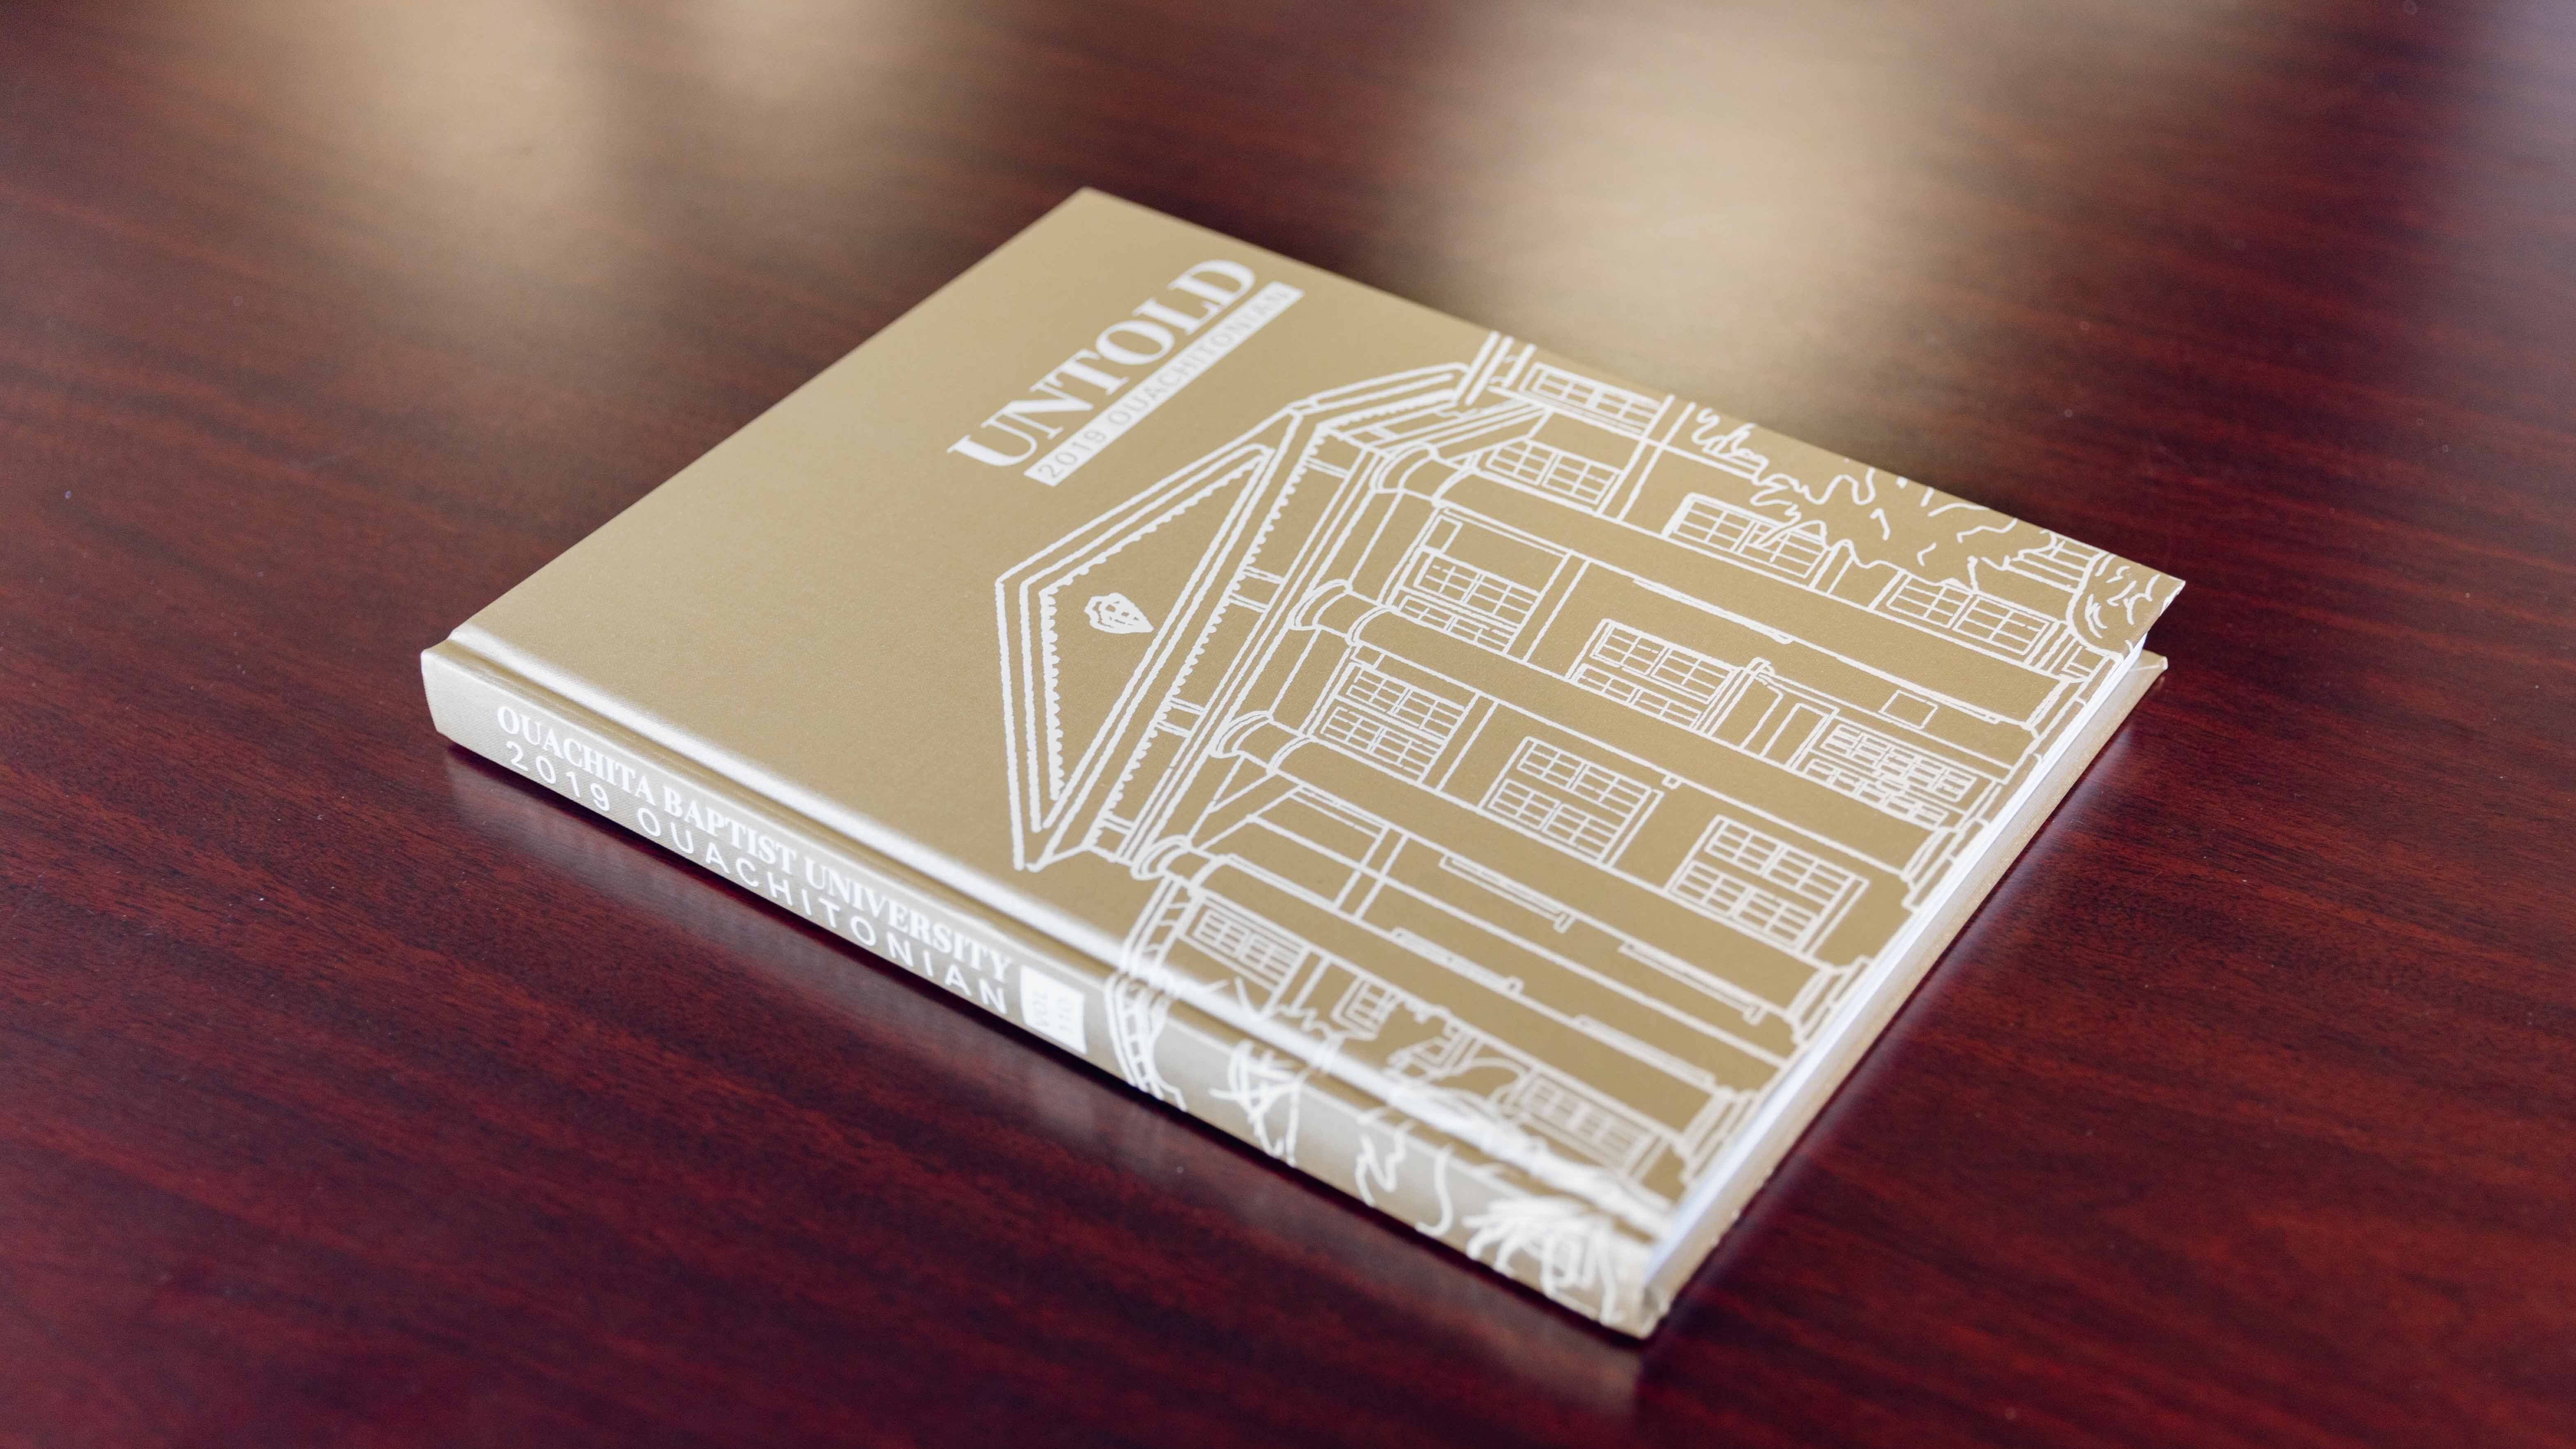 Ouachitonian yearbook 2019